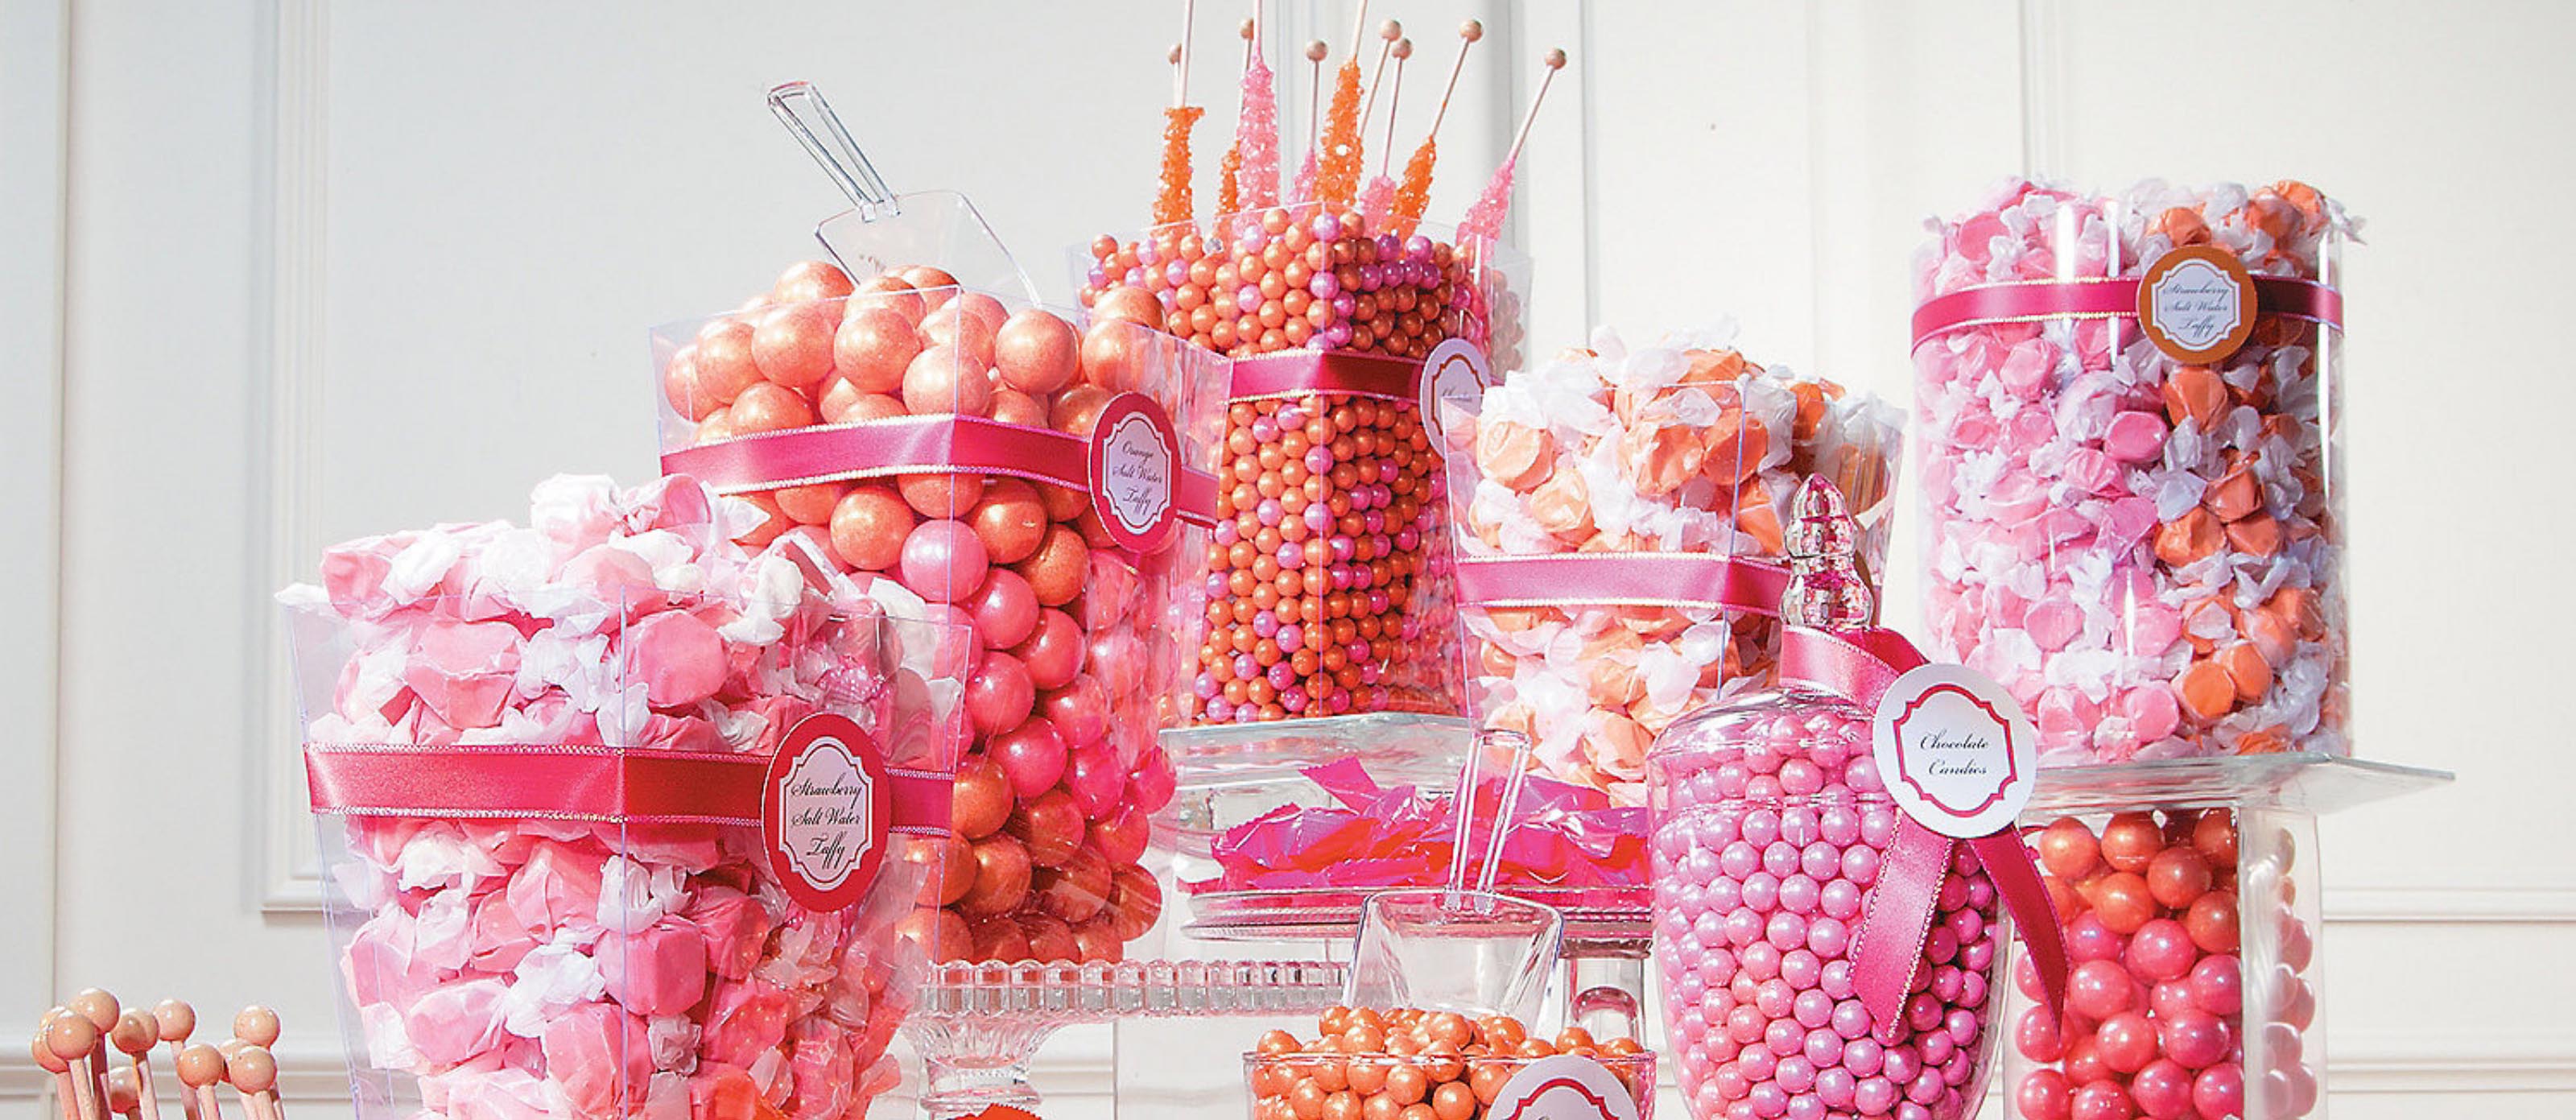 How to Create a Wedding Candy Bar (Buffet) for Your Big Day